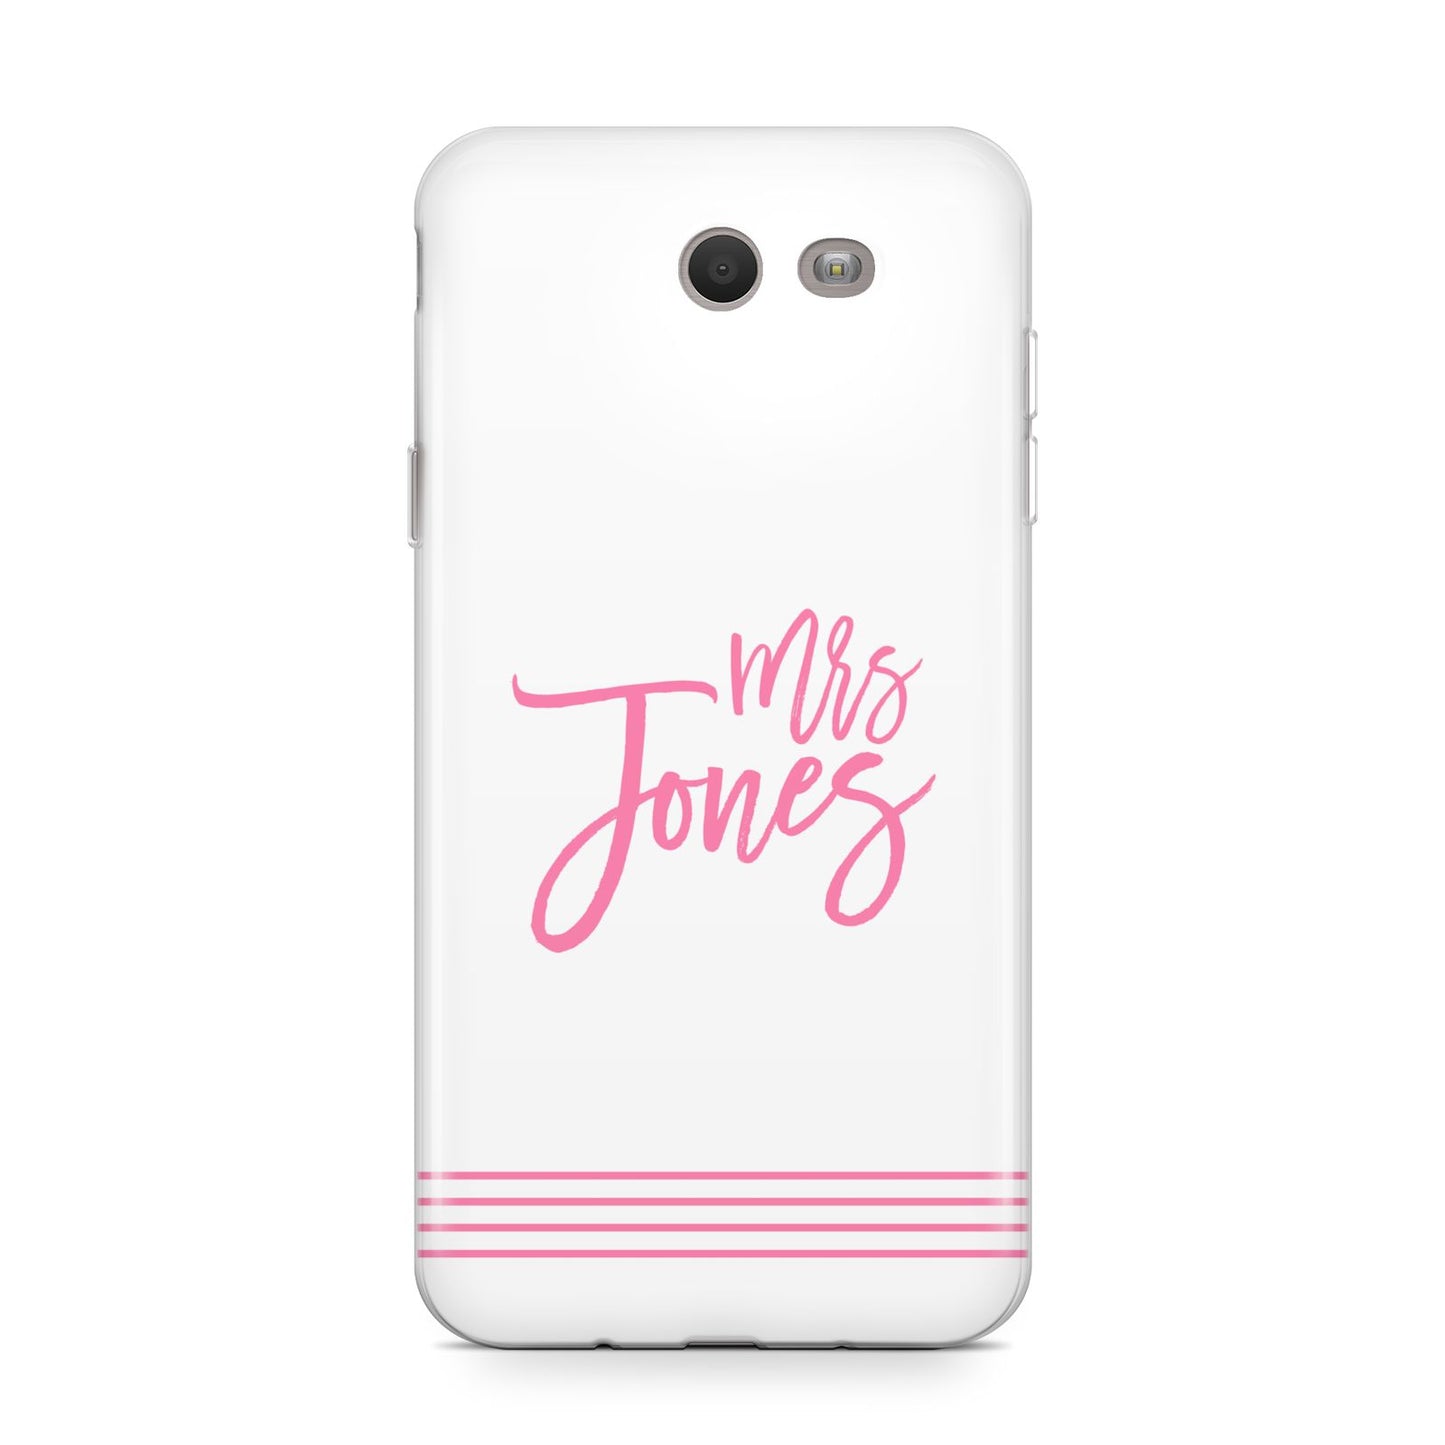 Personalised Hers Samsung Galaxy J7 2017 Case